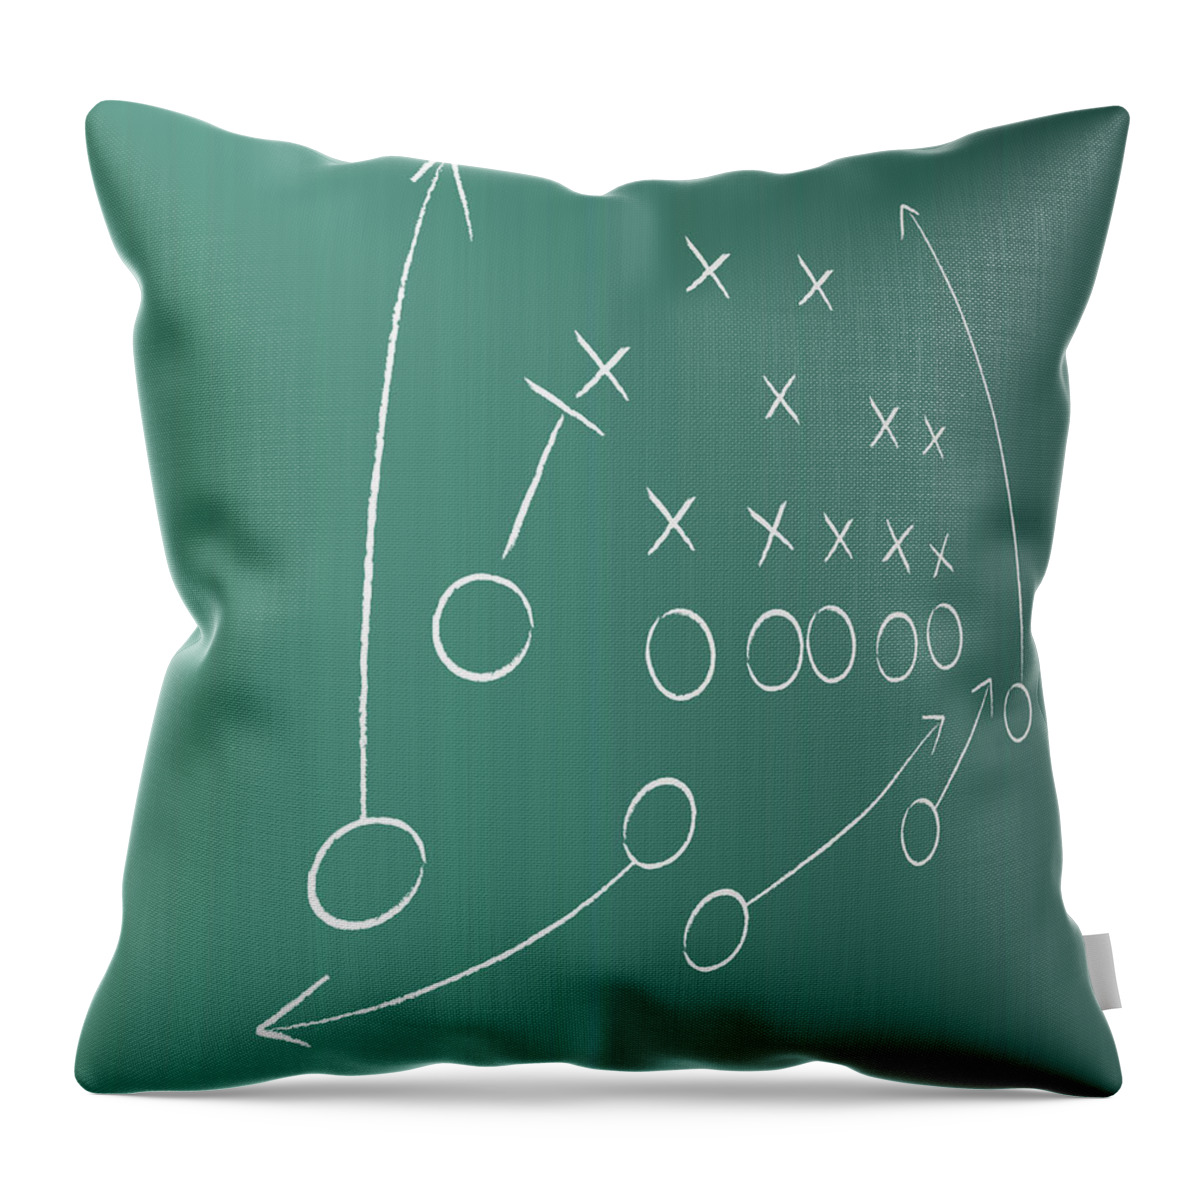 Strategy Throw Pillow featuring the digital art Tactical Plan by Lvcandy